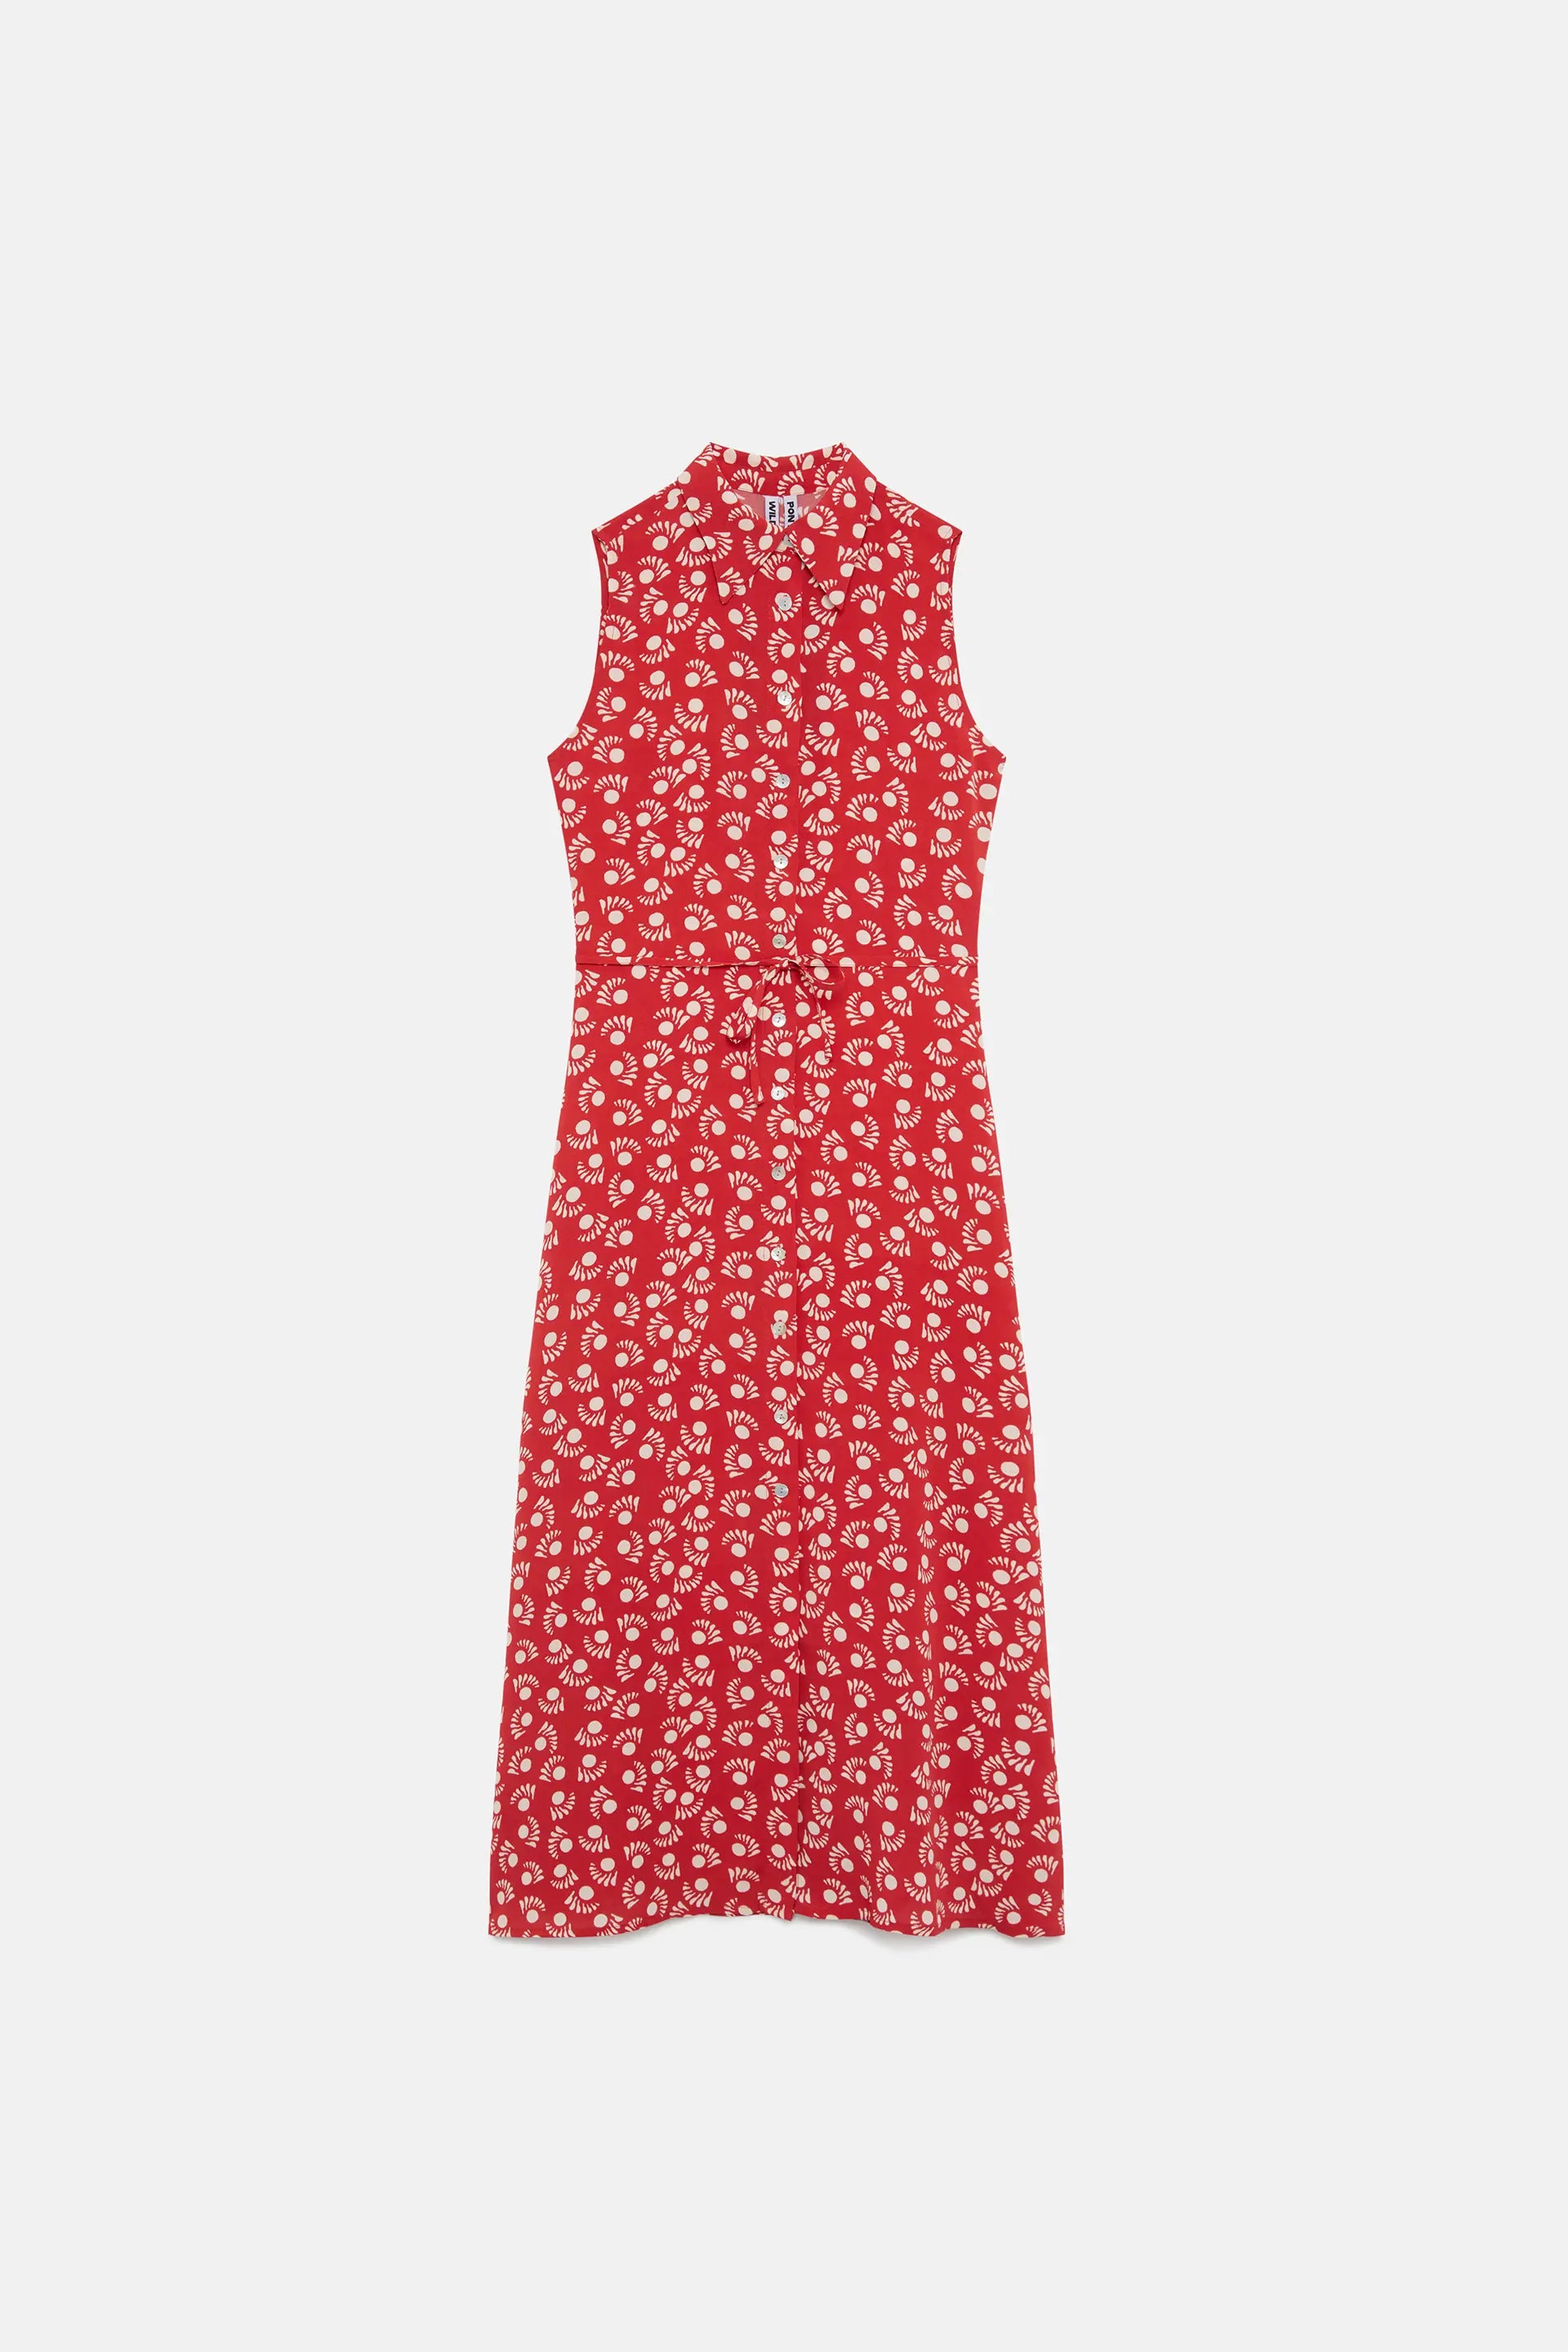 Wild Pony Mars Red printed long dress - clever alice